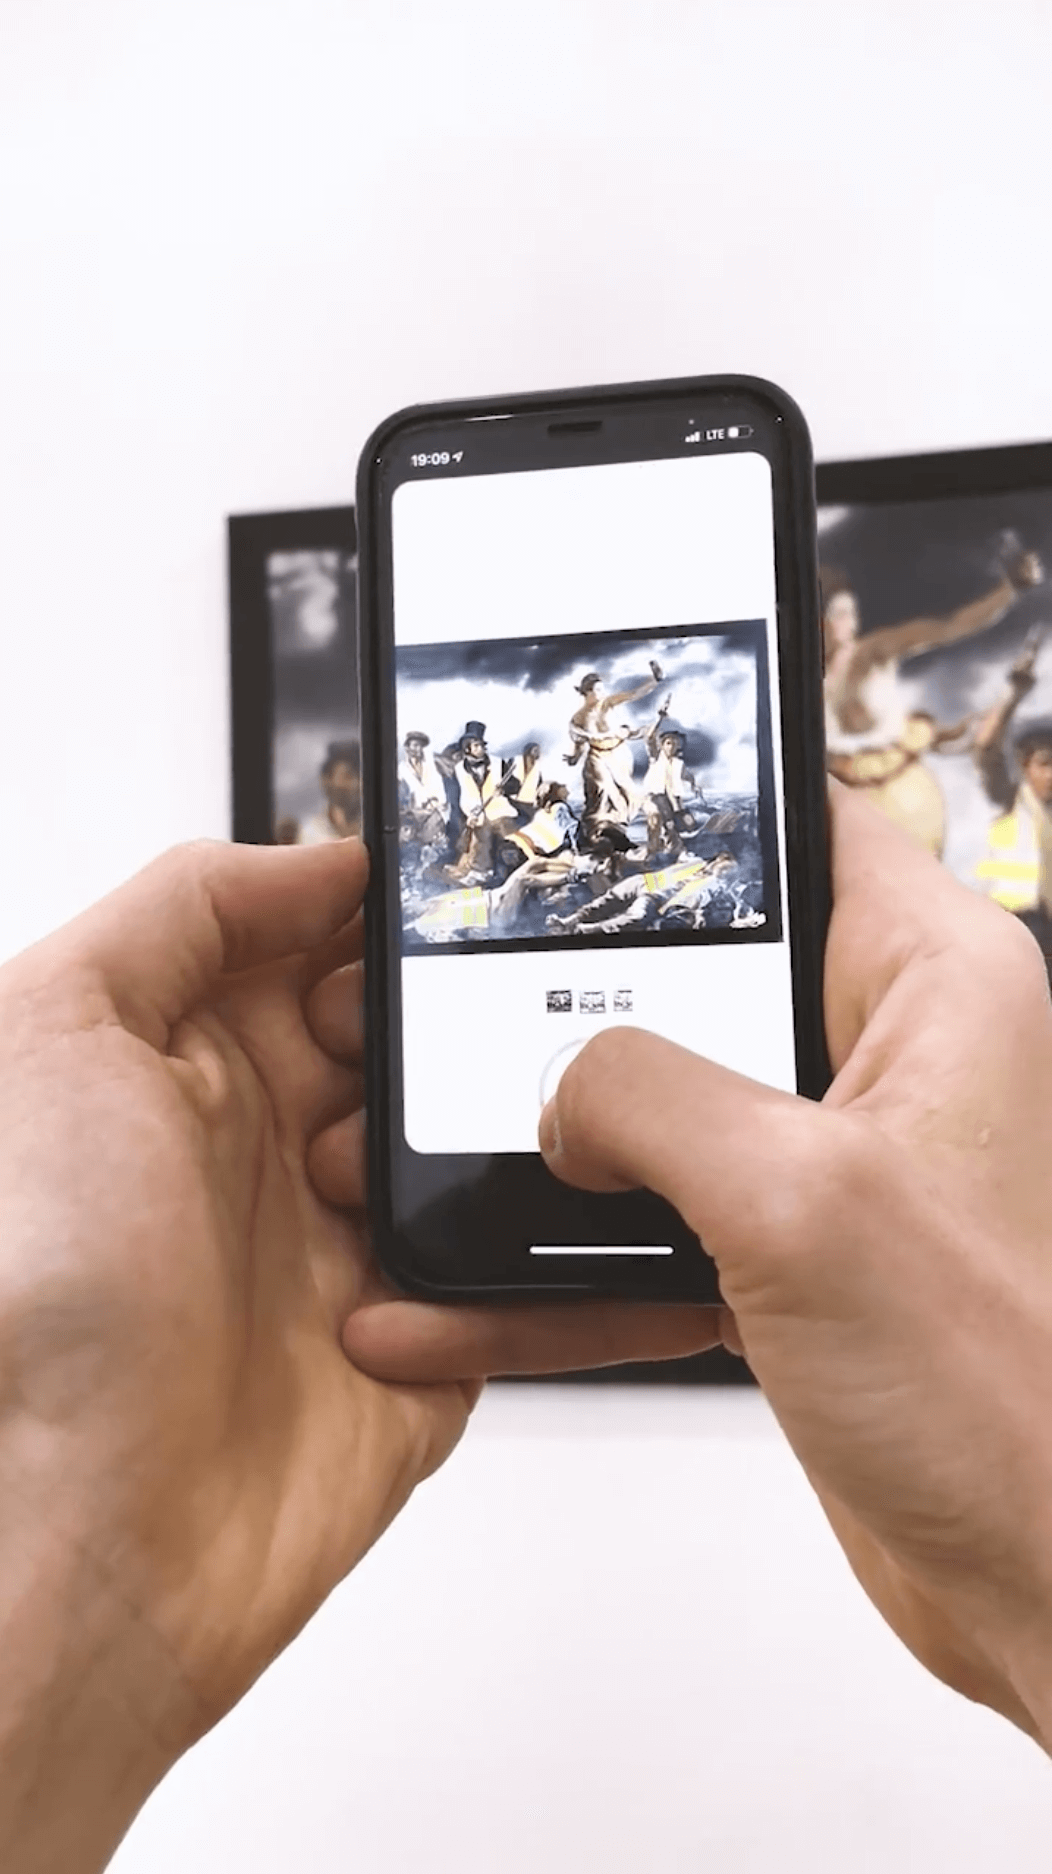 Augmented Reality on phone display, while a person filming classic painting.